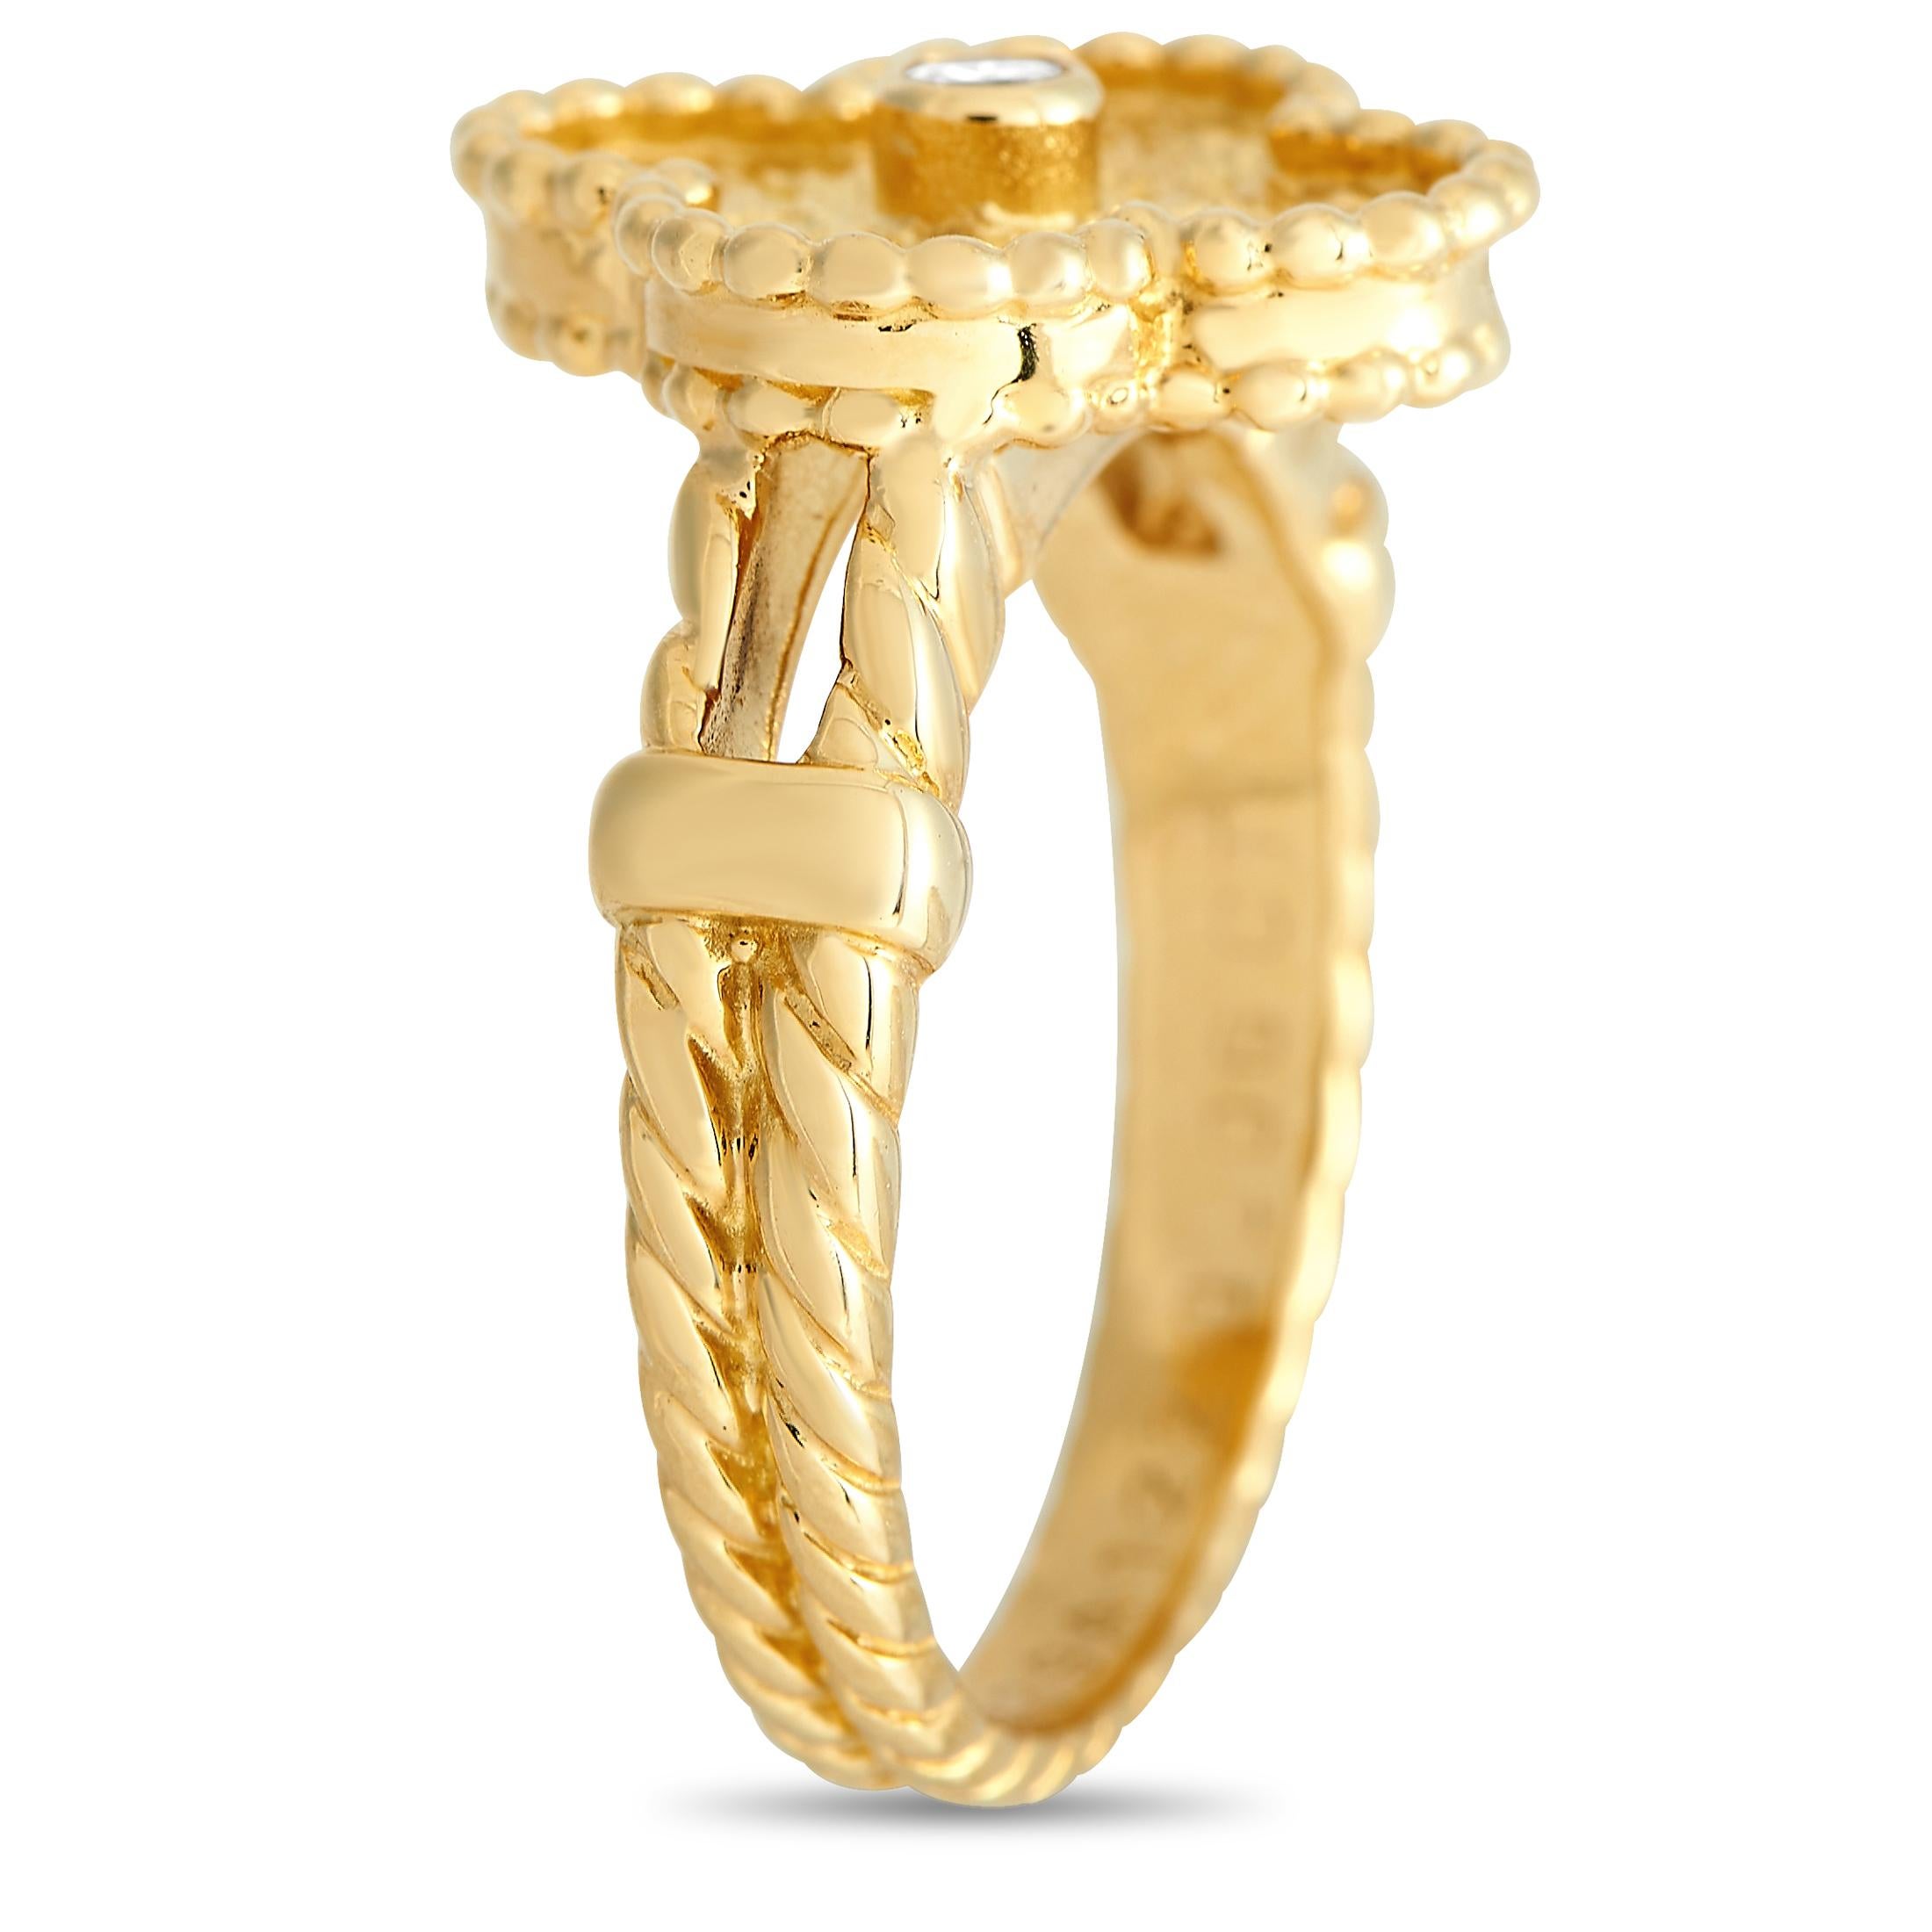 Elevate your accessorizing game with the vintage elegance of this Van Cleef & Arpels ring. This simple yet ornate ring in 18k yellow gold features a split shank with a rope texture and polished collars. The centerpiece is an Alhambra motif with